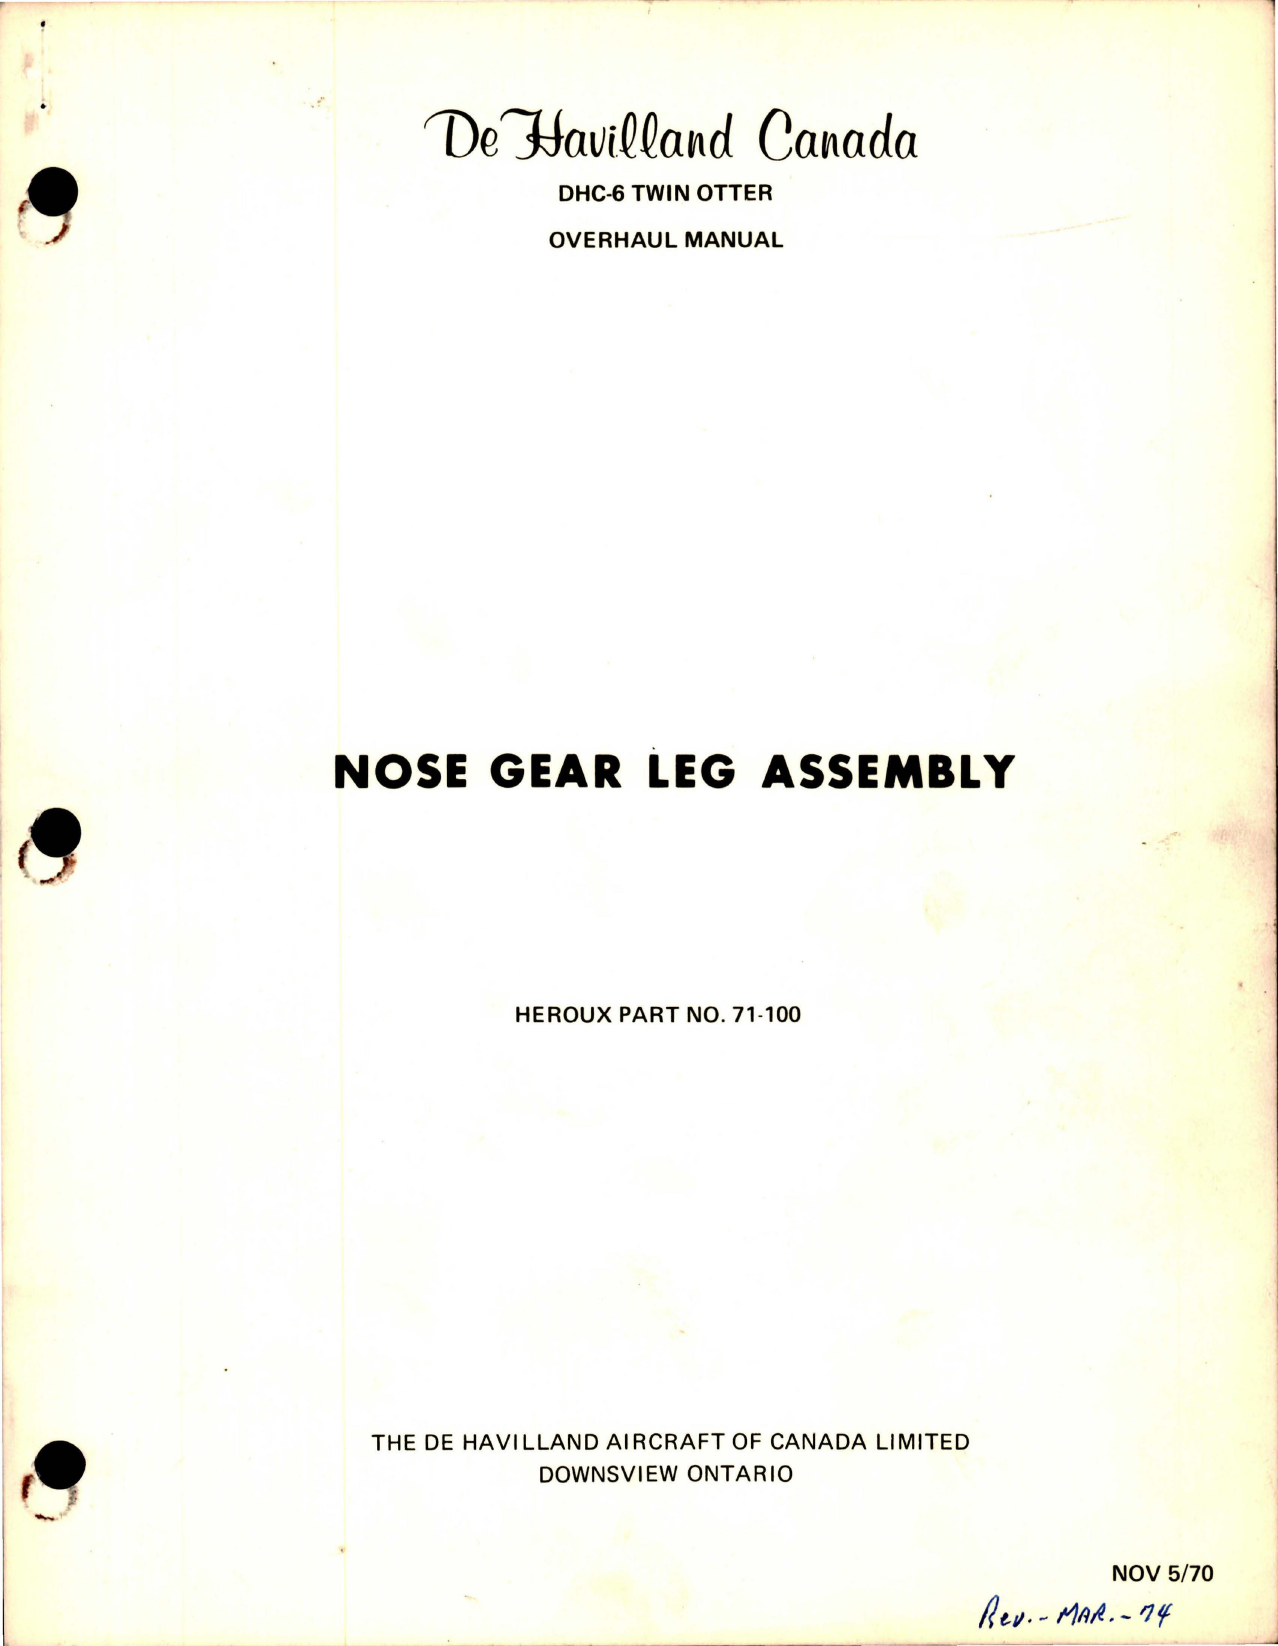 Sample page 1 from AirCorps Library document: Overhaul Manual for DHC-6 Twin Otter Nose Gear Leg Assembly - Part 71-100